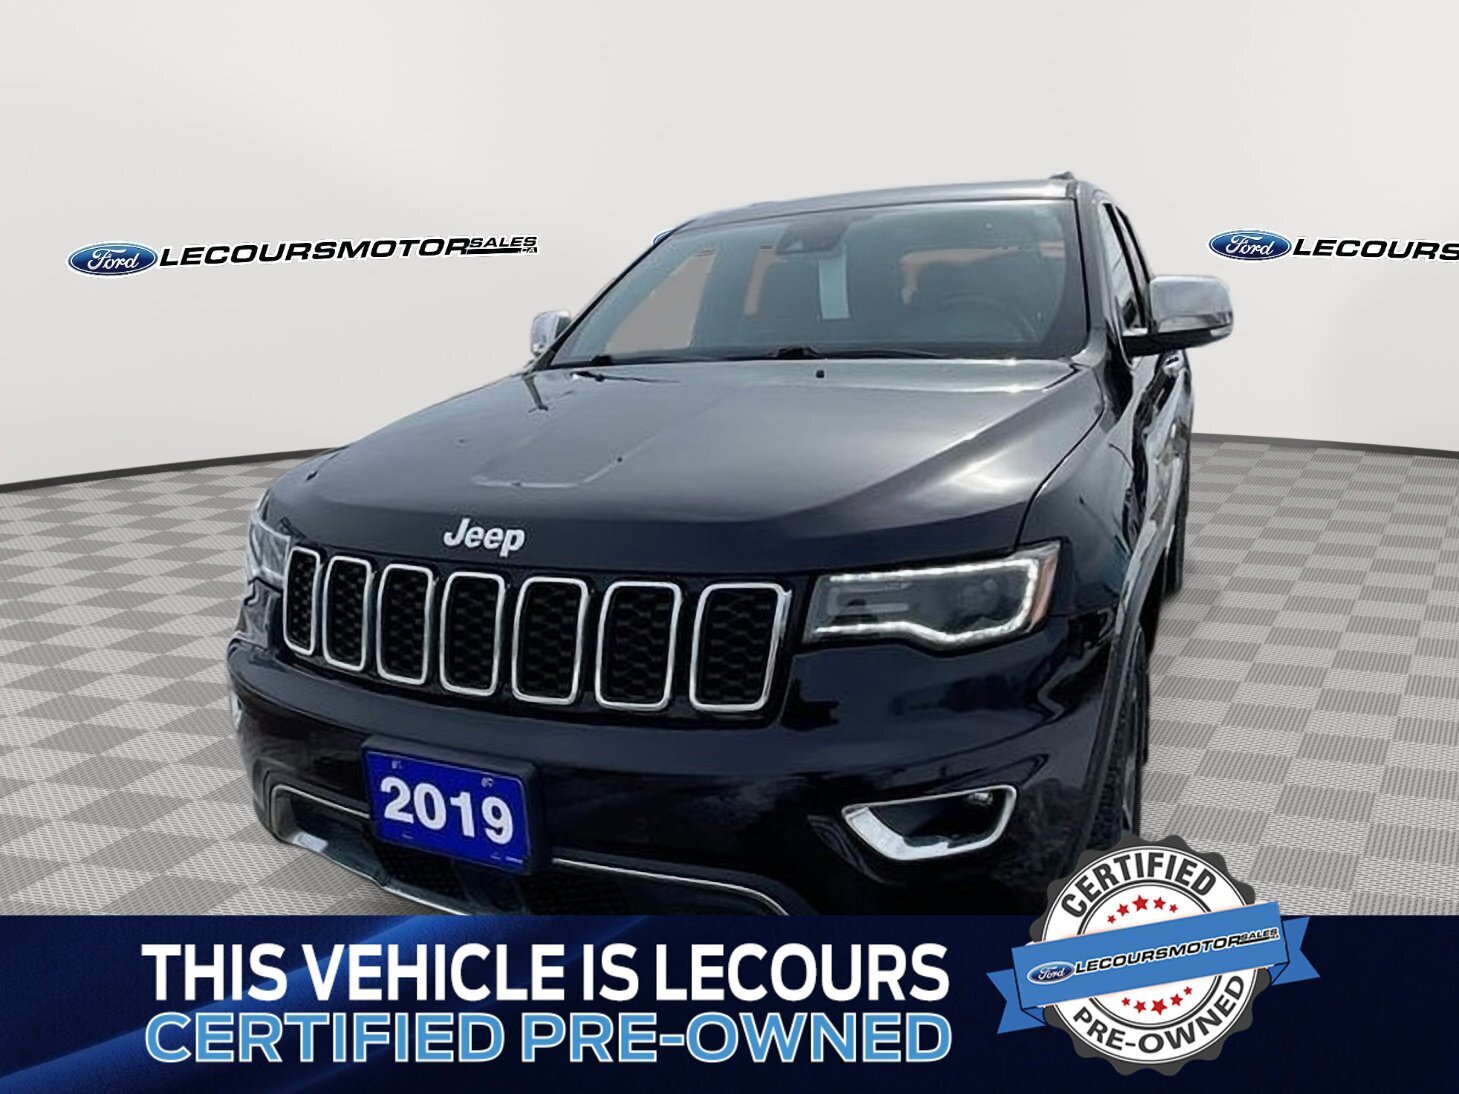 2019 Jeep Grand Cherokee 3.6L V6 ENGINE | LEATHER INTERIOR | CLEAN